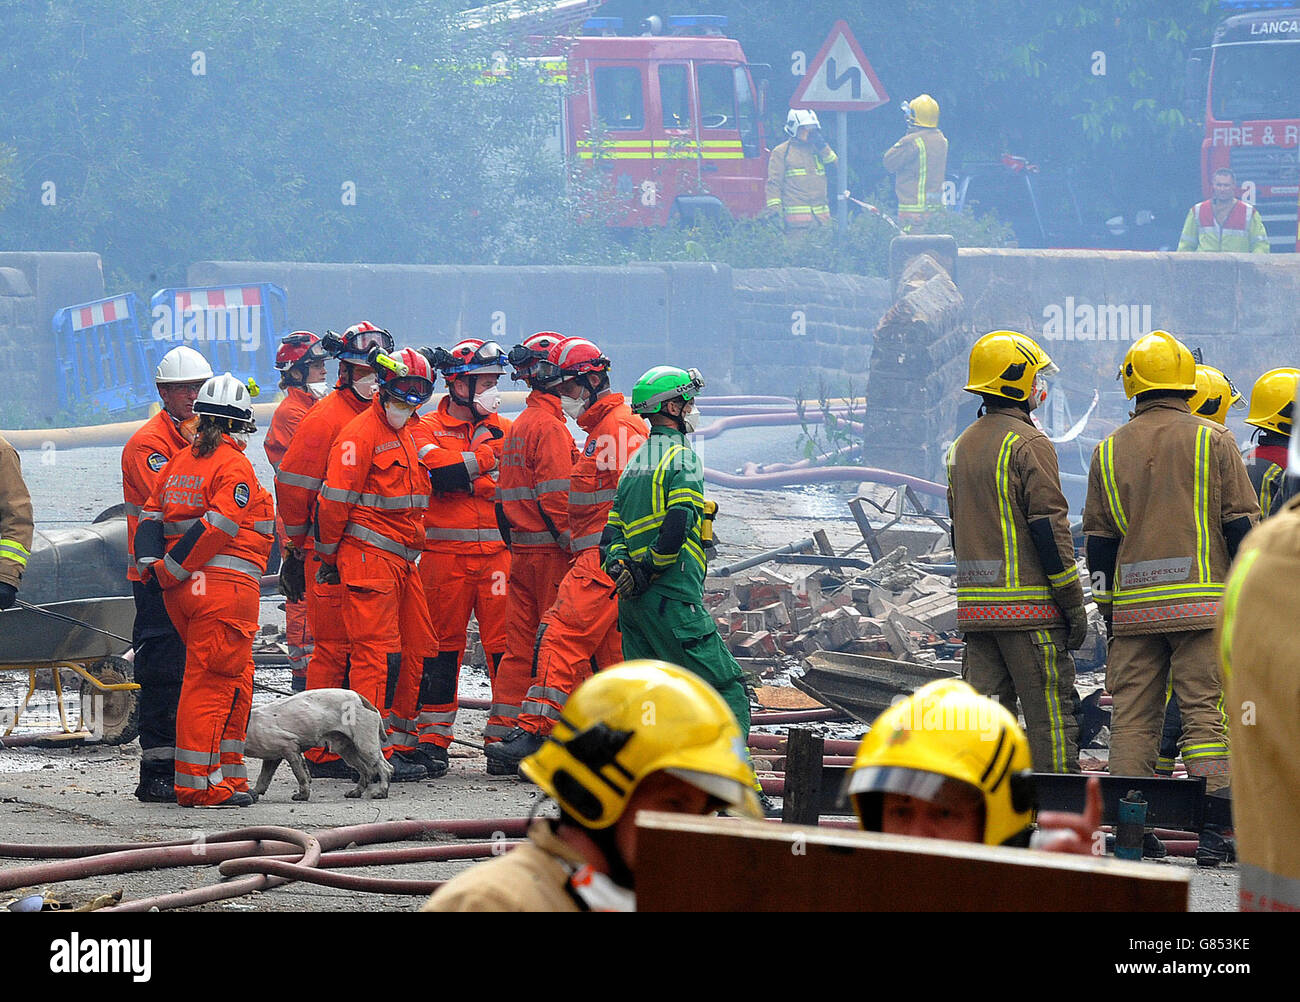 Search and rescue teams from all emergency services search the scene of an explosion and fire where four people are still missing at Wood Flour Mills, Bosley, Cheshire. Stock Photo